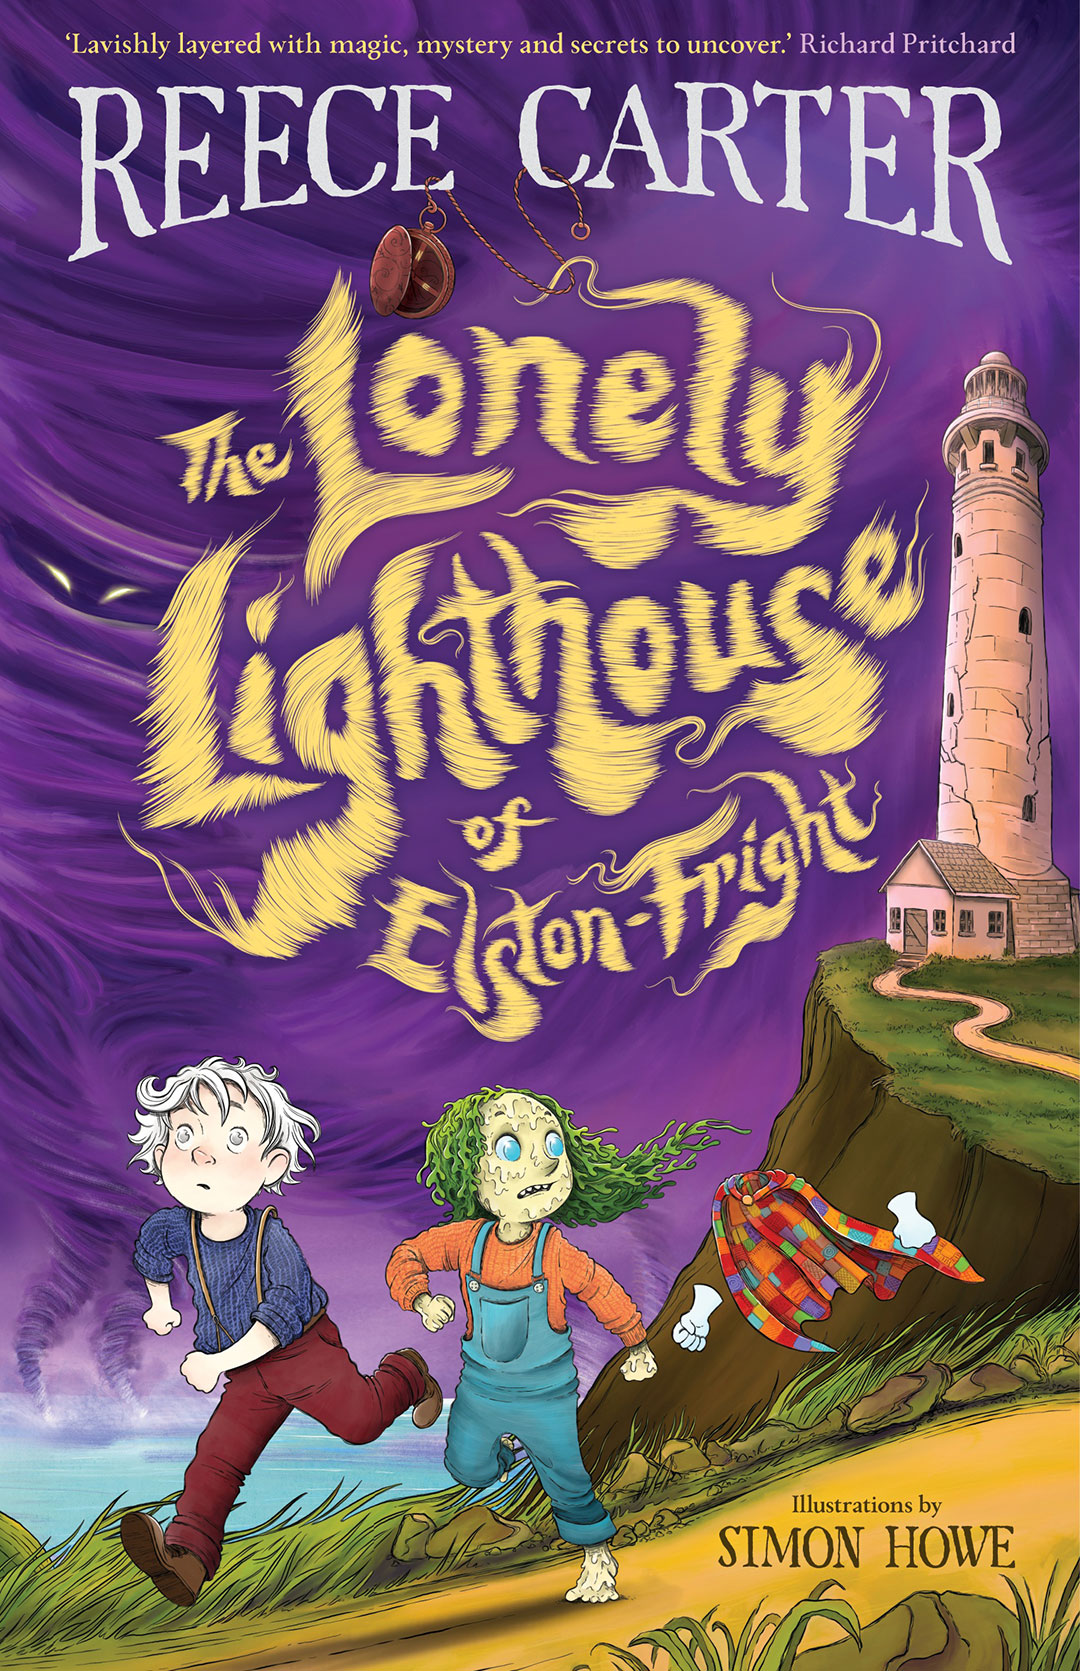 the Lonely Lighthouse of Elston fright an Elston fright Tale by Reece Carter